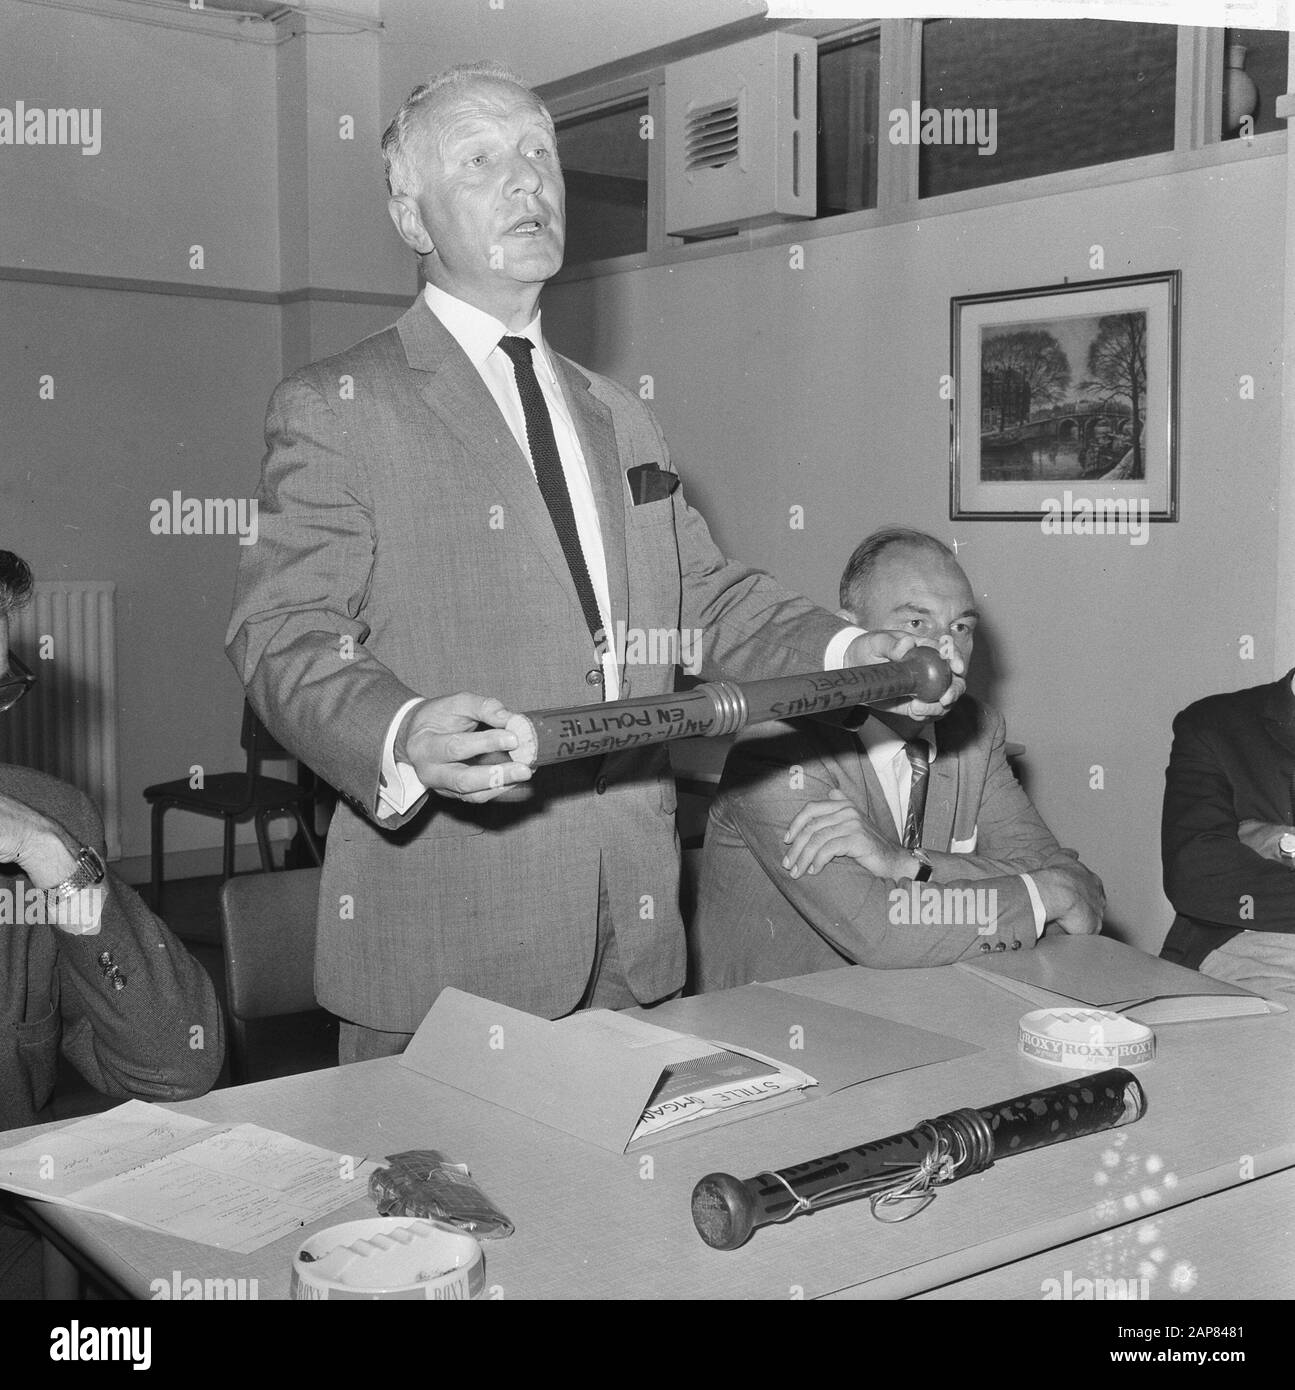 Provo's at the chief commissioner Description: Commissioner Molenkamp gives press conference Date: 14 August 1965 Location: Amsterdam, Noord-Holland Keywords: chief commissioners, press conferences, police Institution name: Provo Stock Photo